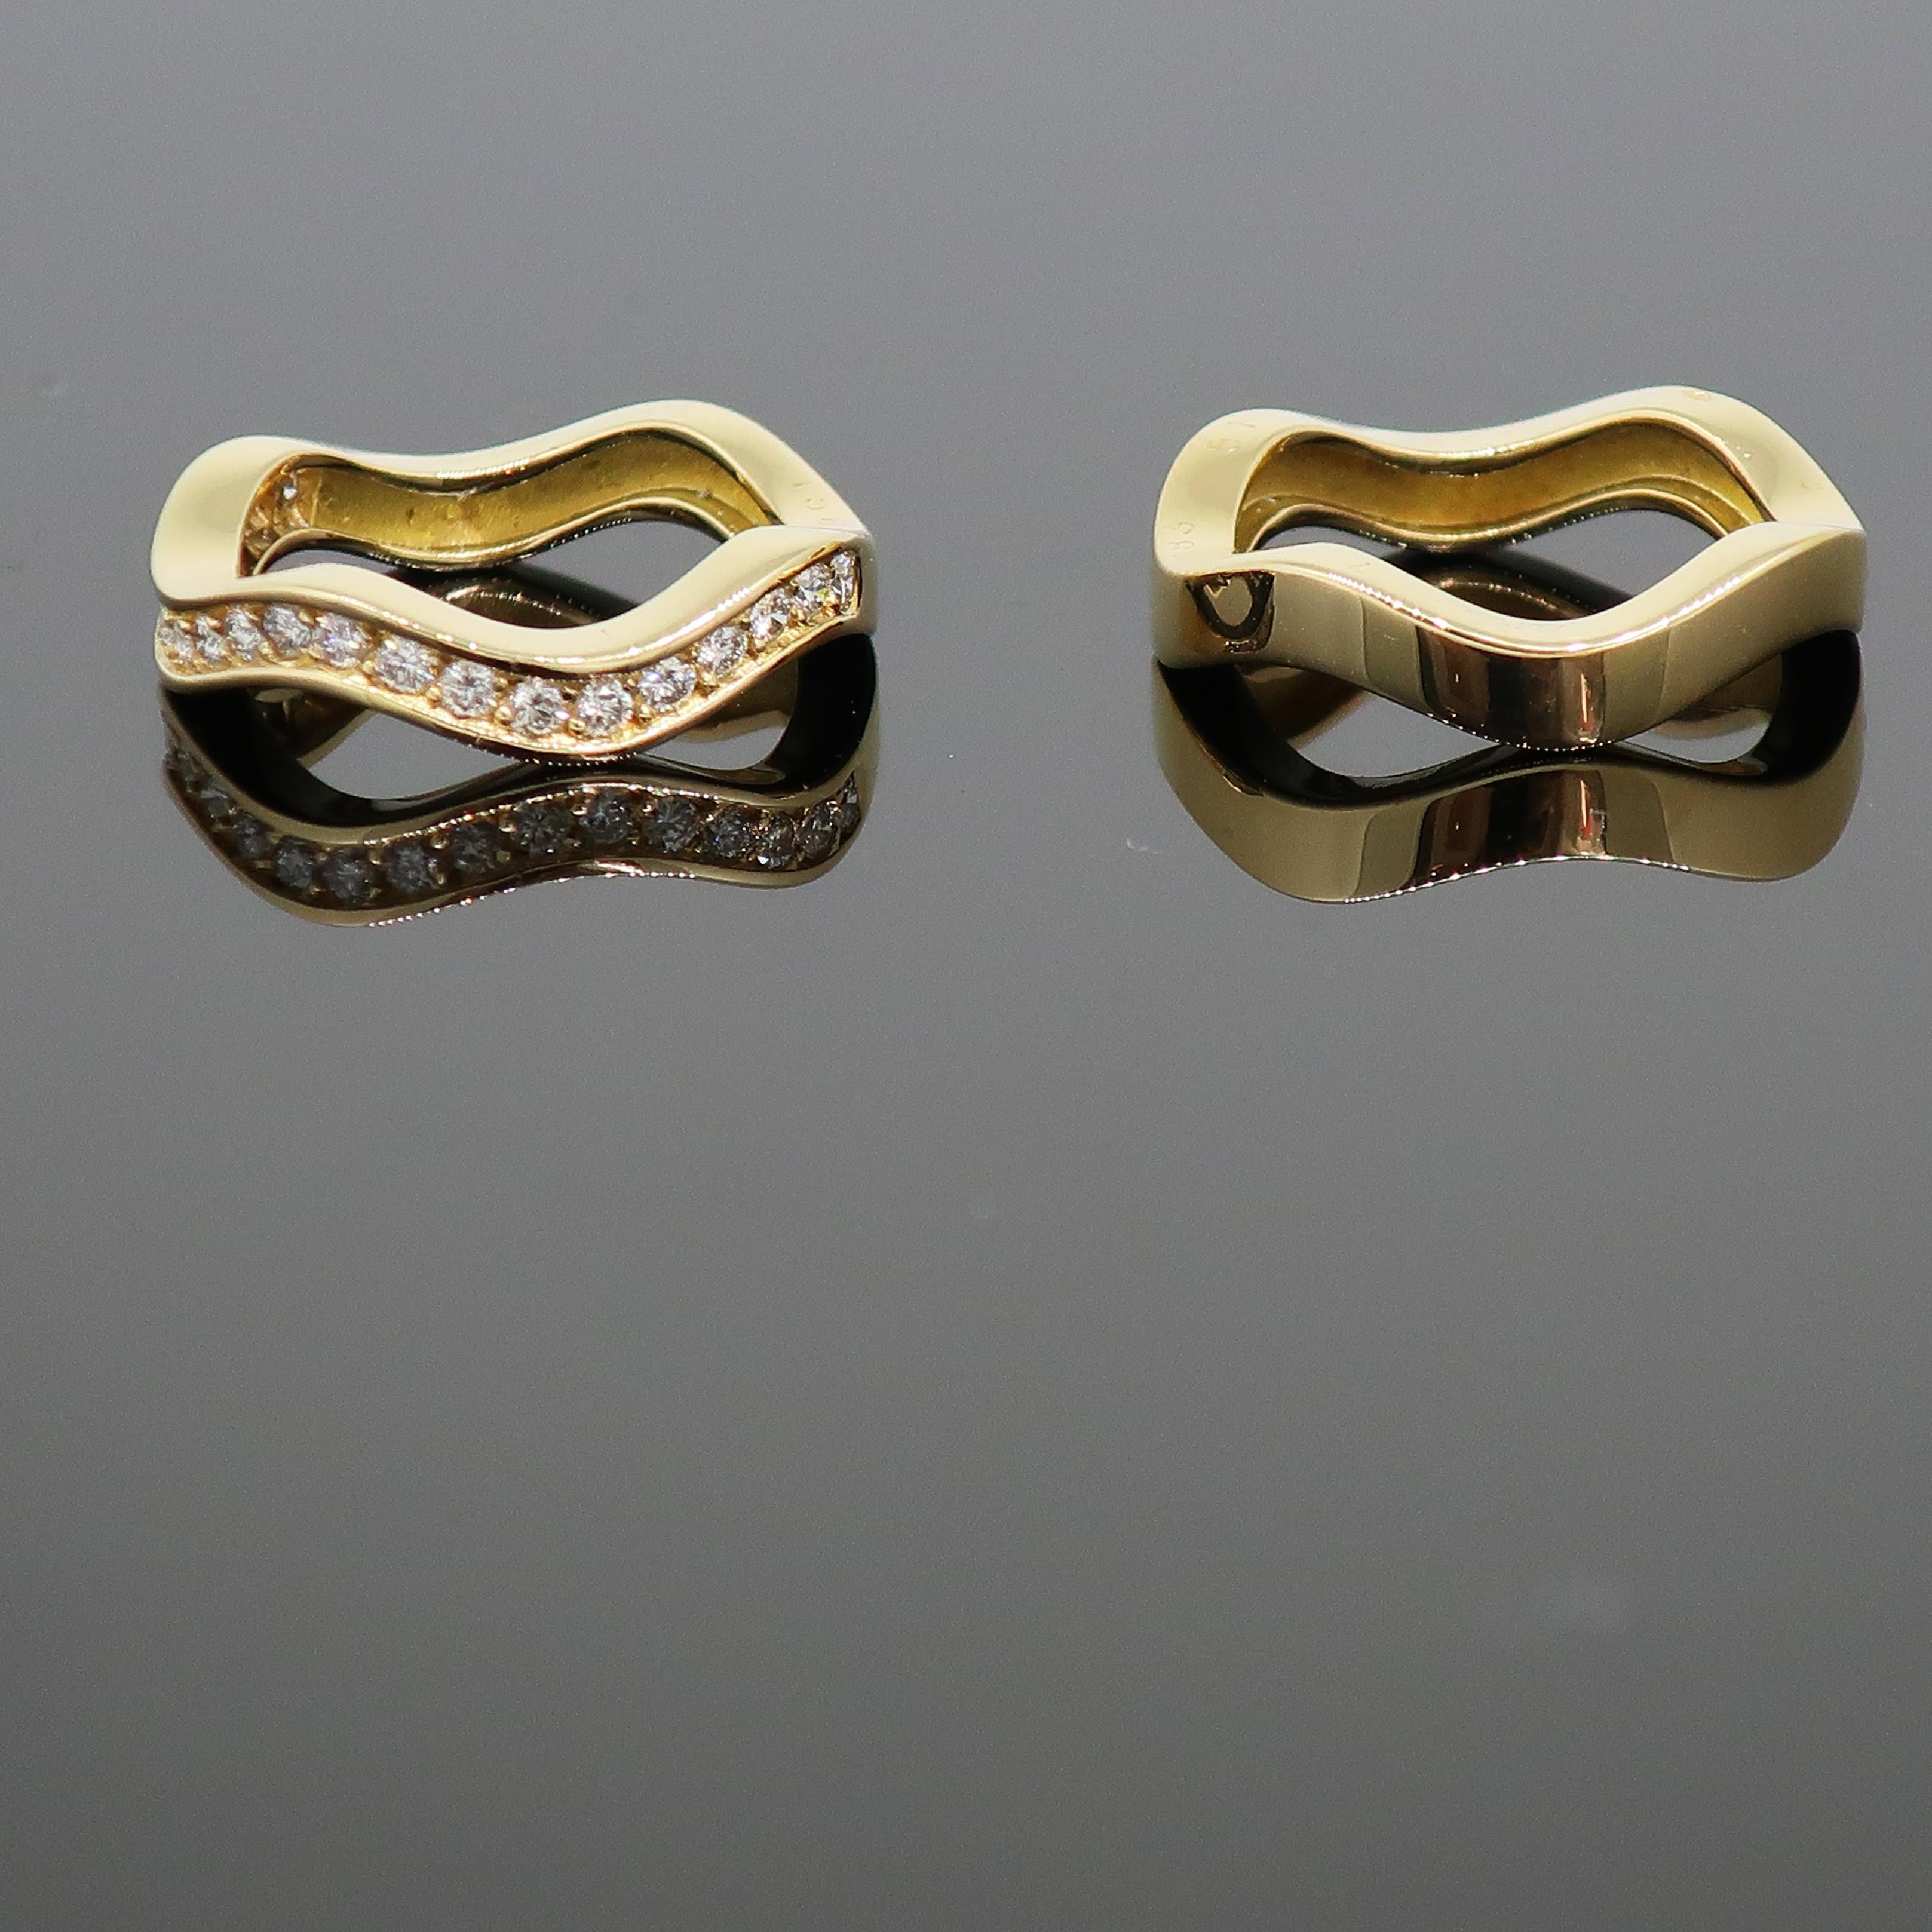 Cartier Diamond Wave Band Ring Set 18ct Yellow Gold Size 51

Two wave rings by Cartier. One plain band and one set with twenty white brilliant cut diamonds. These rings fit perfectly together, the would look great if you had another colour Cartier